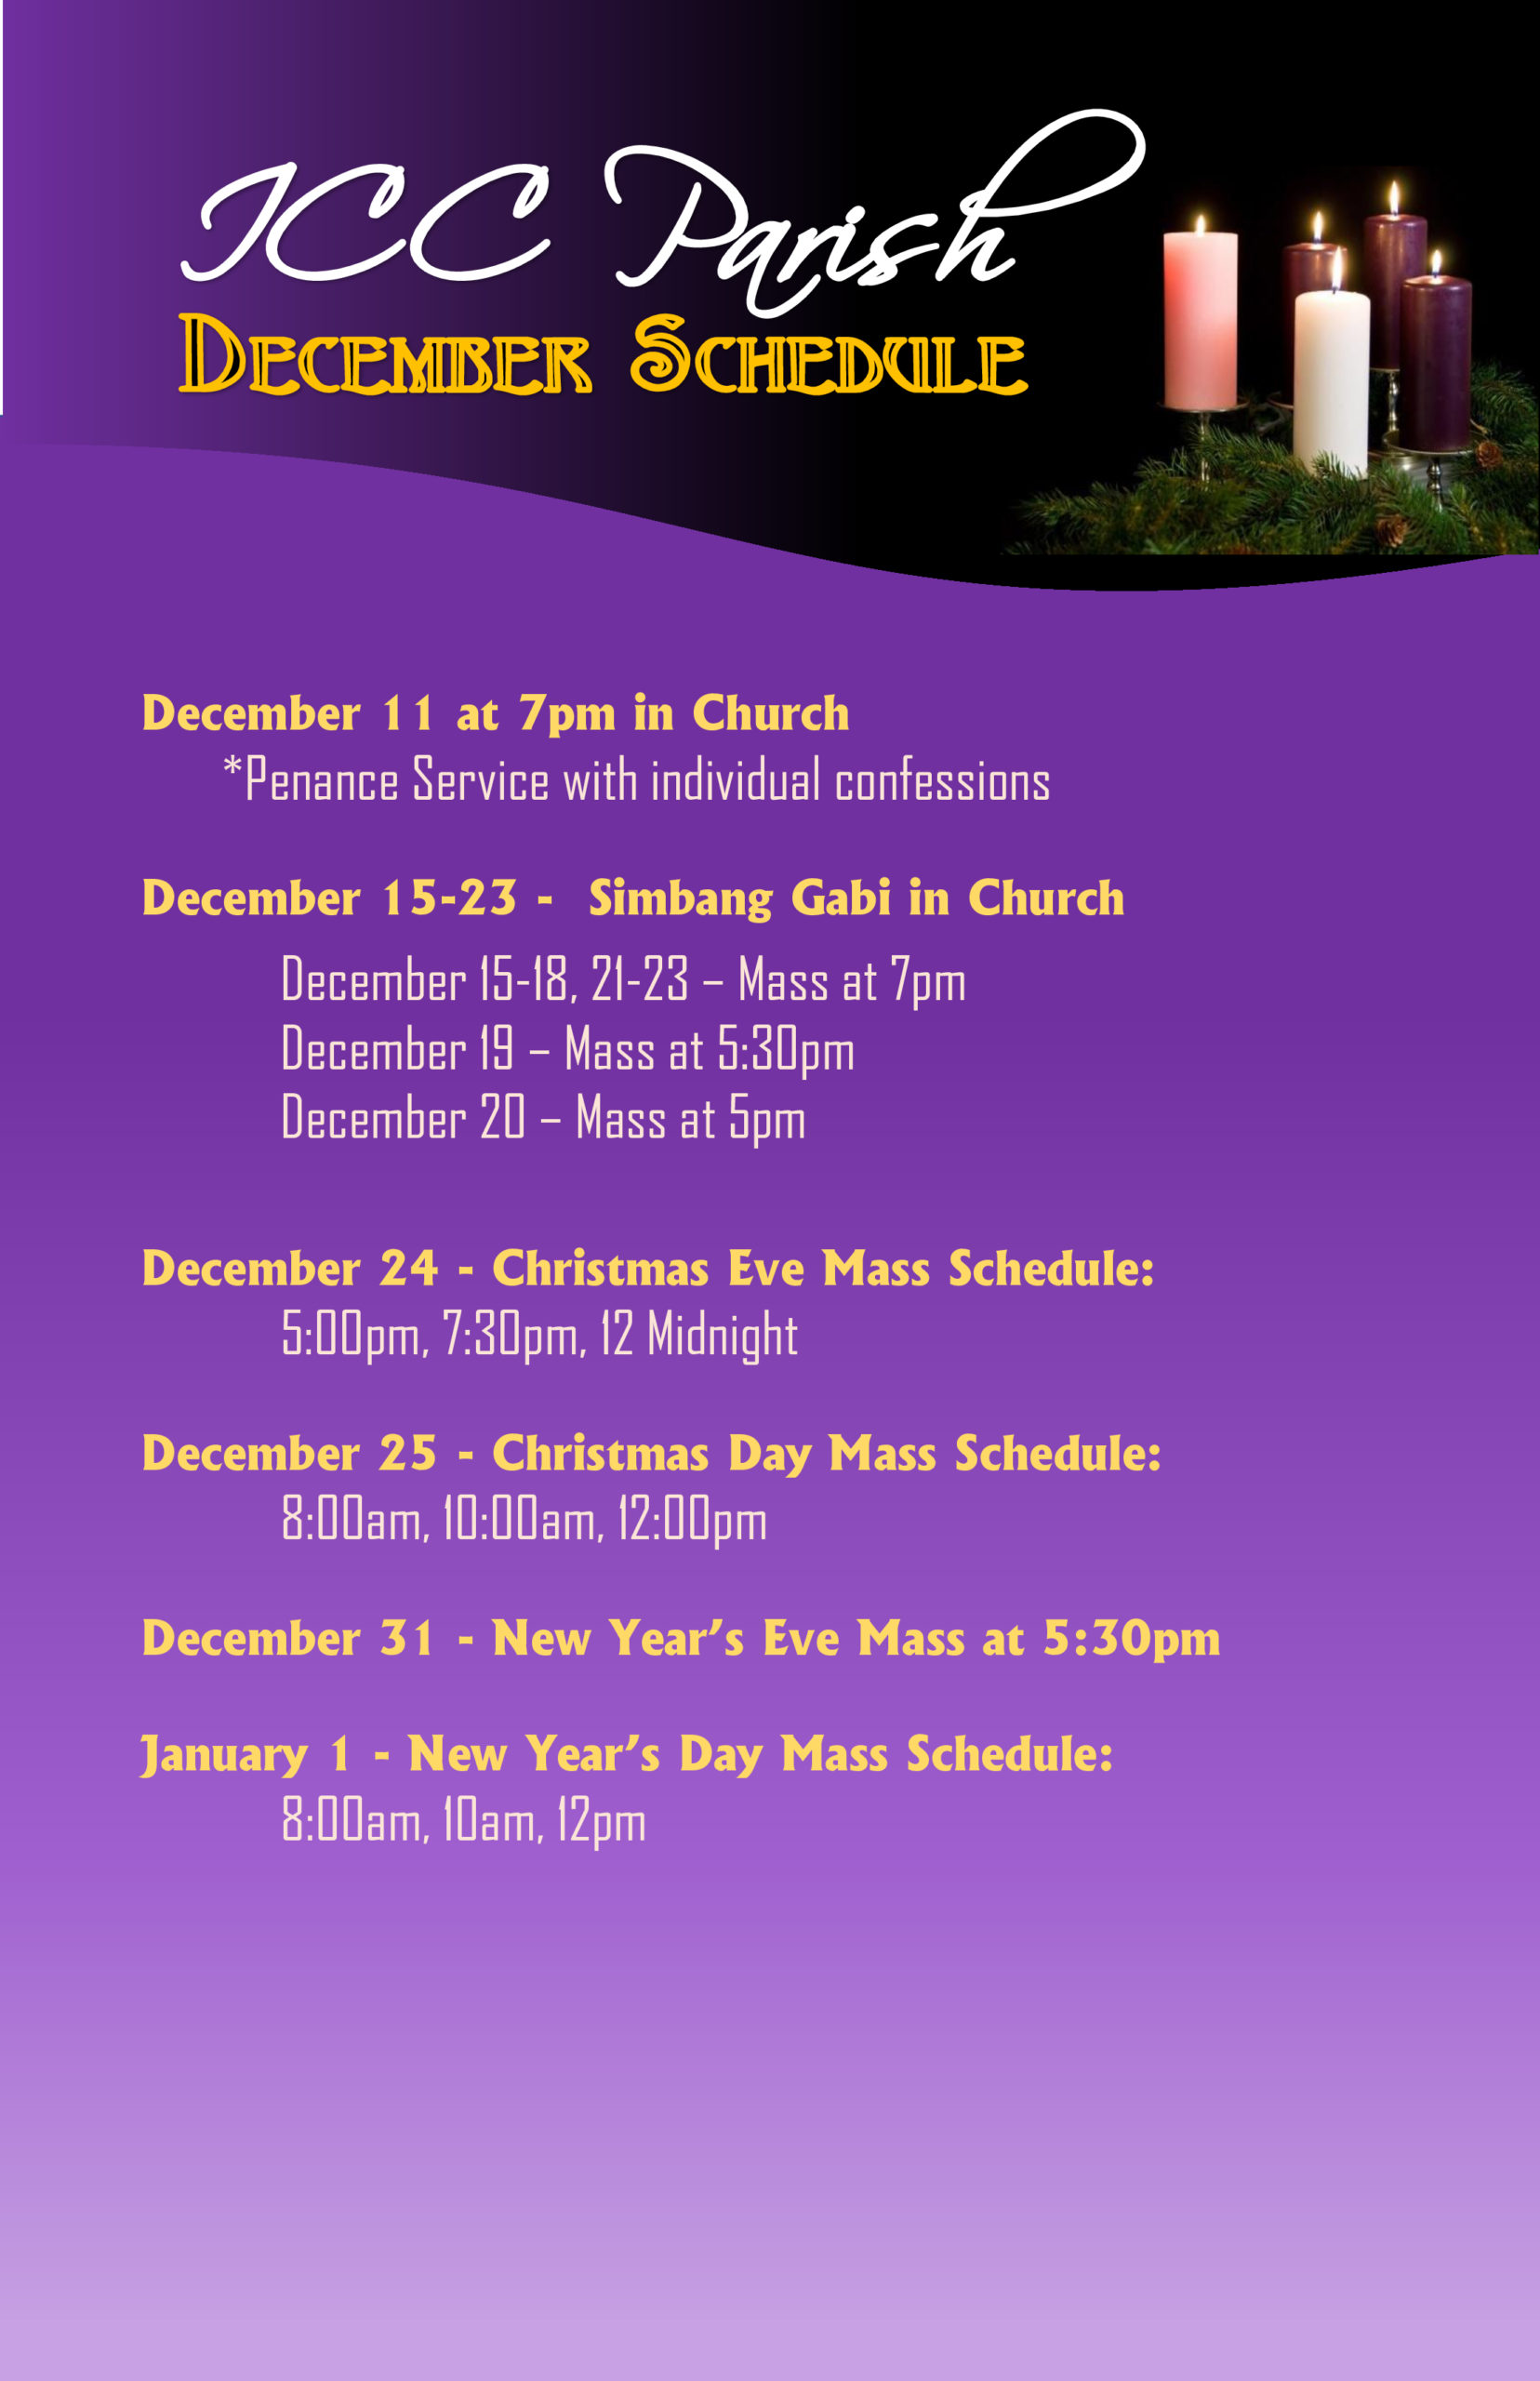 Immaculate Conception Church » ICC December Schedule